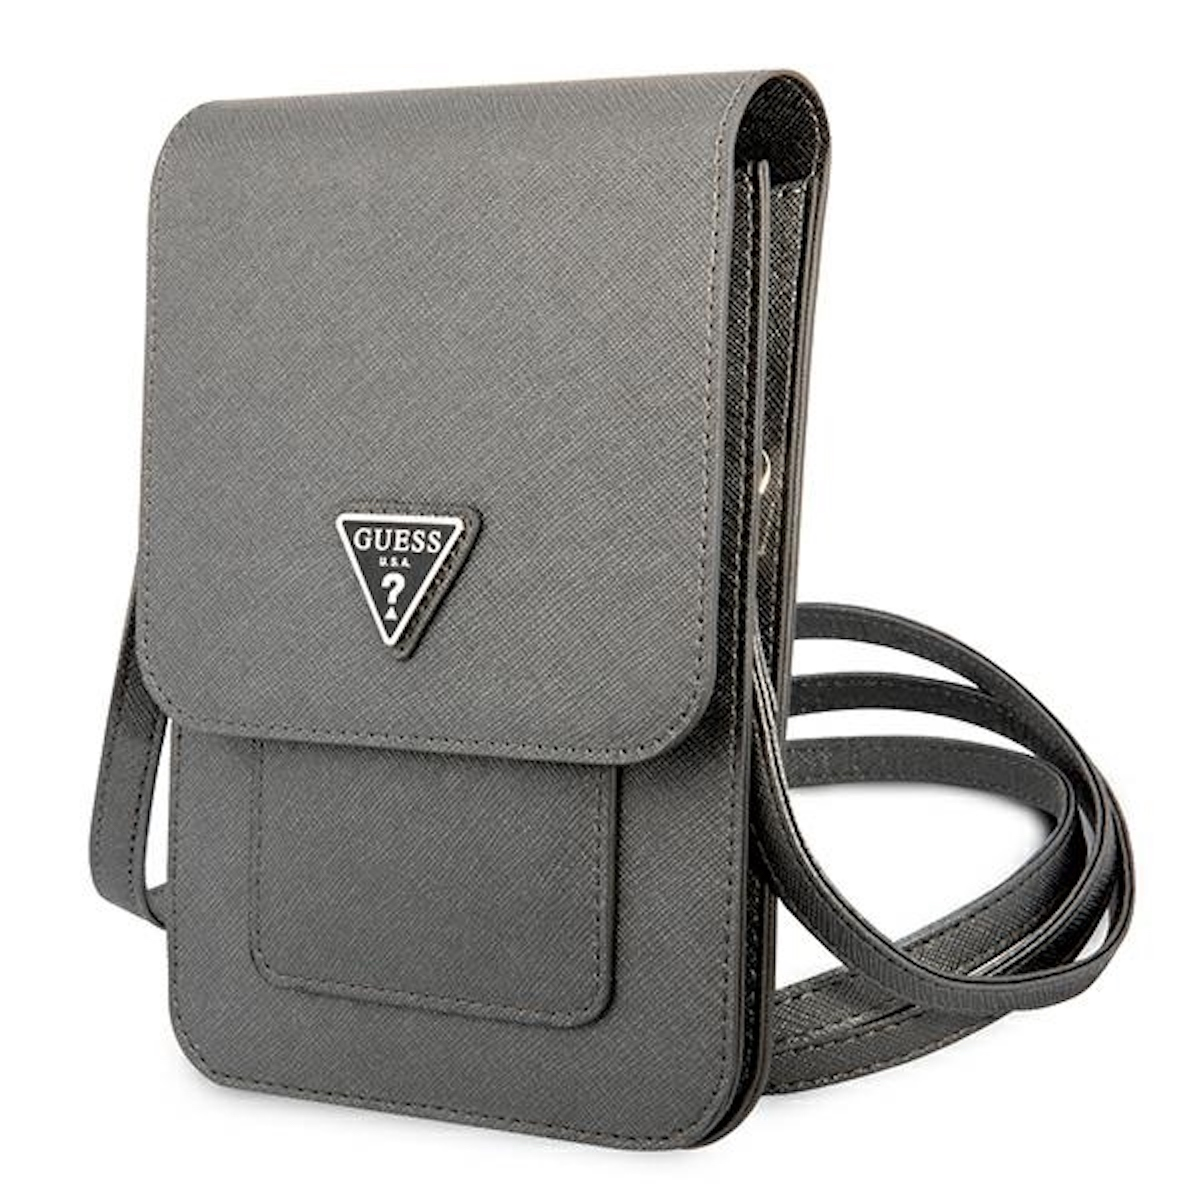 Grau Tasche, Umhängetasche, Universelle Triangle Universell, GUESS Full Cover, Saffiano